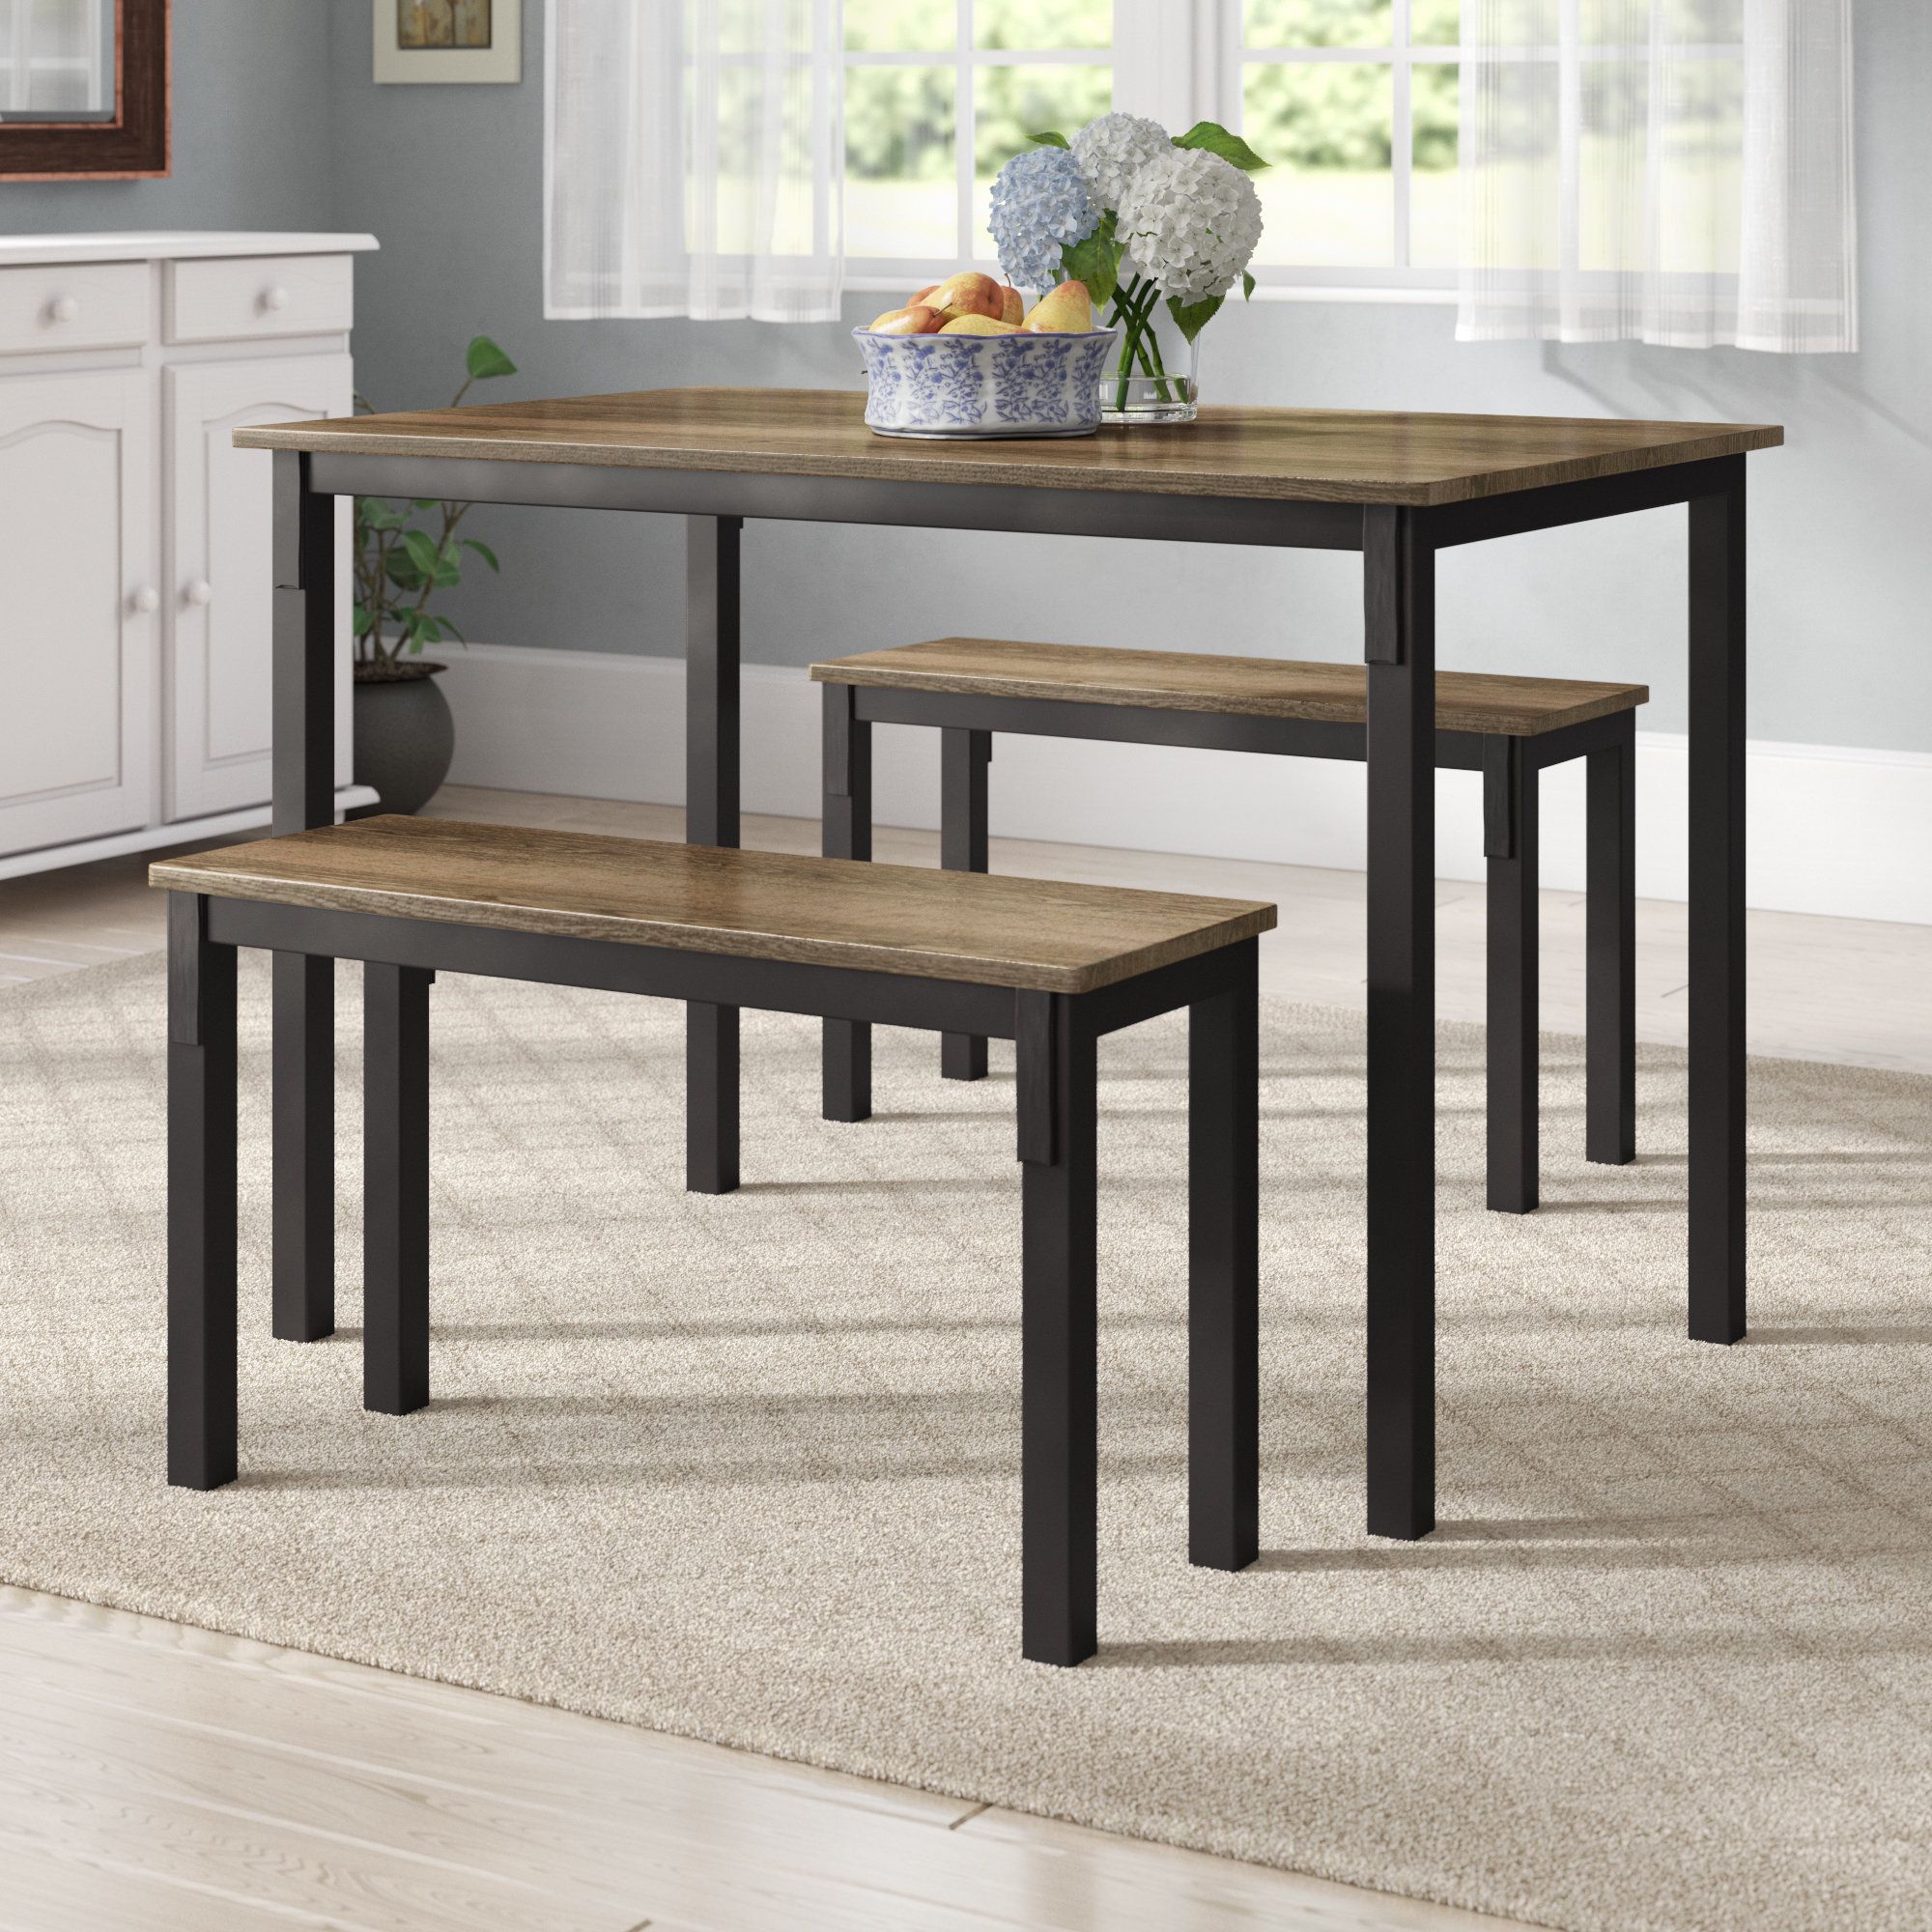 Rossiter 3 Piece Dining Sets Intended For Newest Rossiter 3 Piece Dining Set (View 1 of 20)